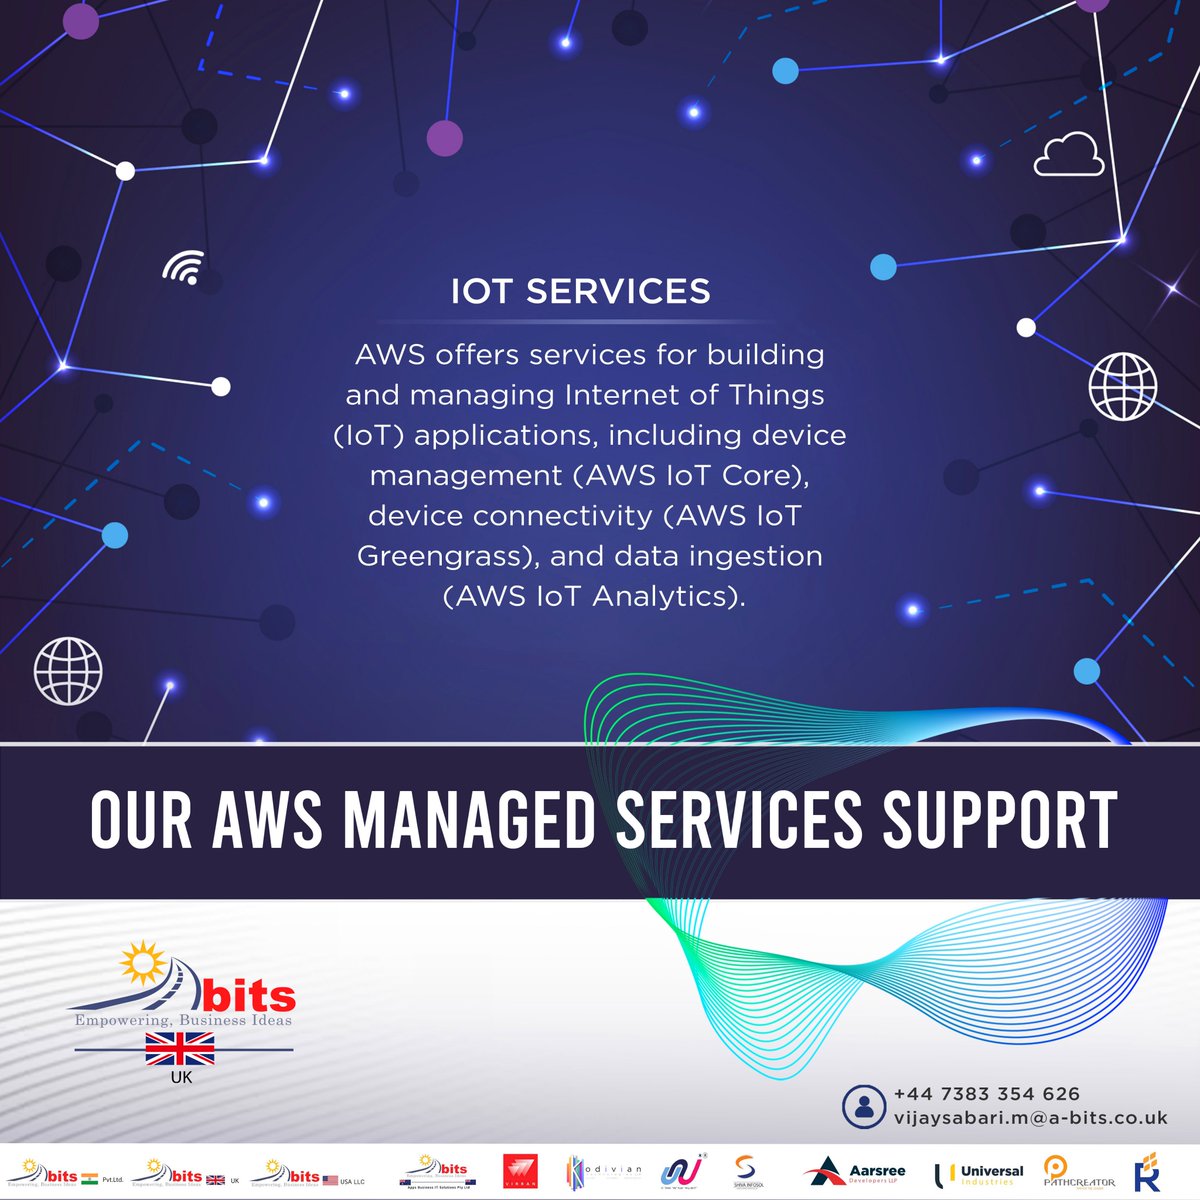 Our AWS Managed Services Support

#AbitsUK #aws #IOT #ai #artificialintelligence #securityengineer #cloudengineer #it #cloudservices #devopsengineer #cloudmigration #innovation #informationtechnology #security #cloudconsulting #cloudtechnology #artificialintelligence